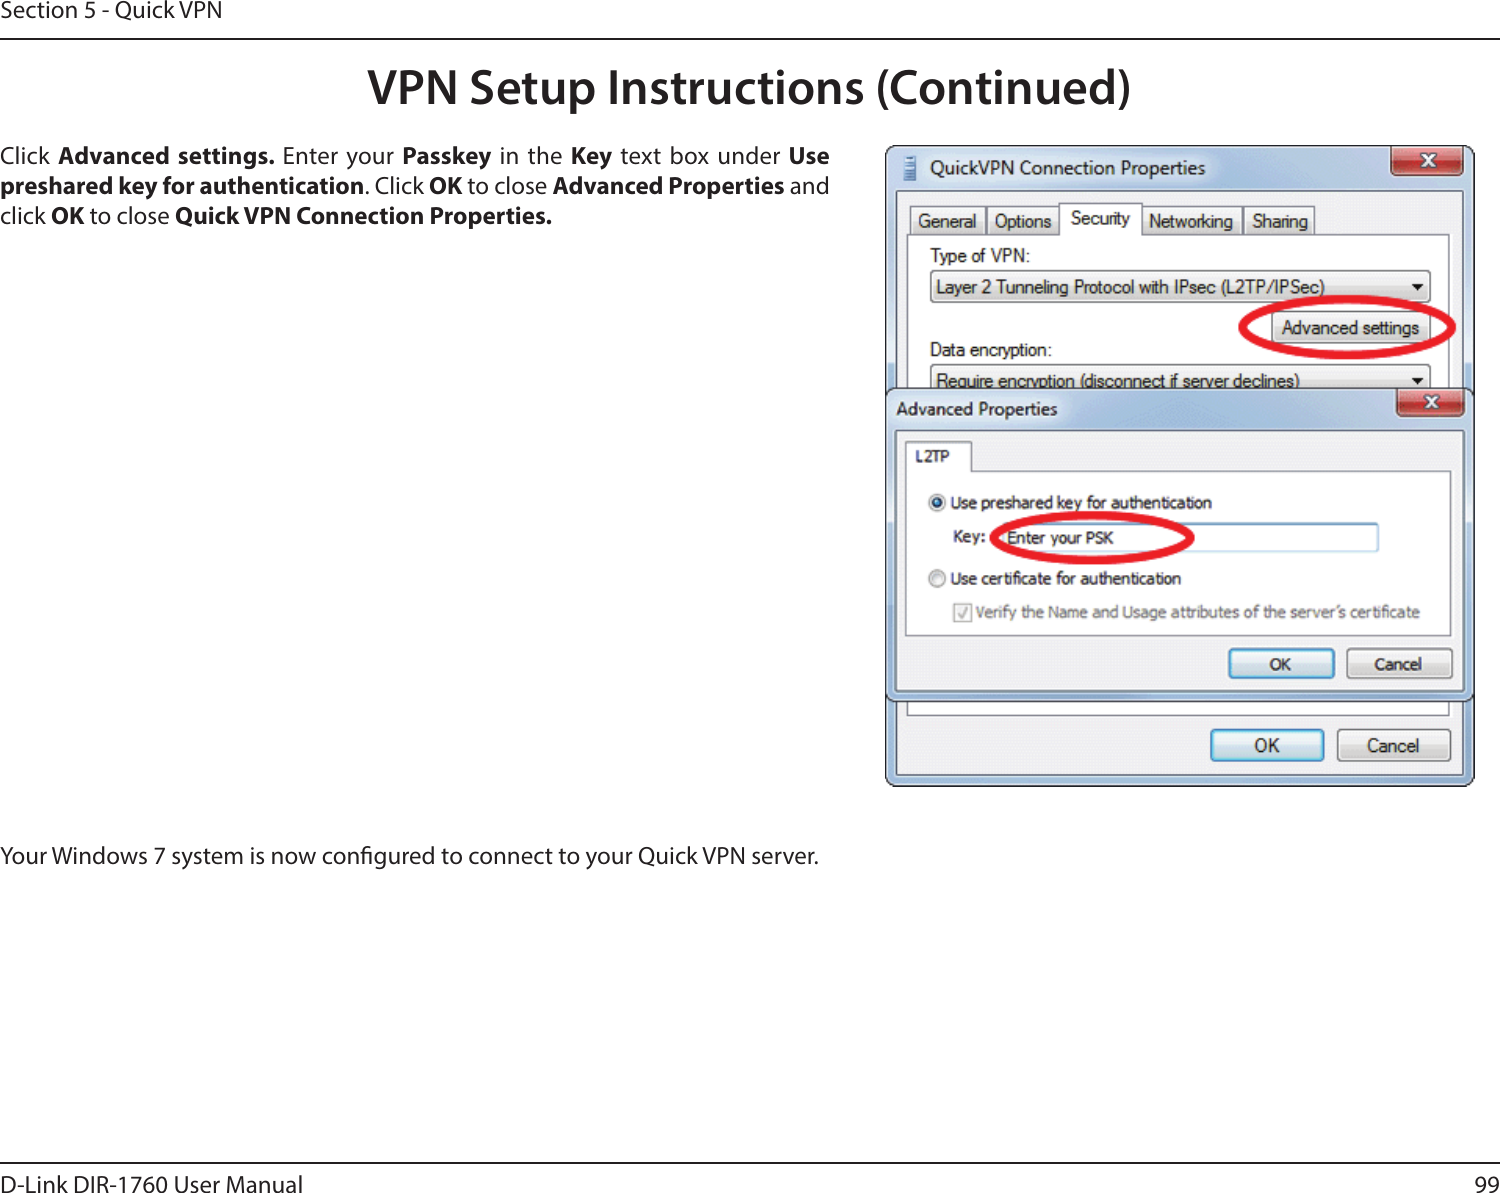 99D-Link DIR-1760 User ManualSection 5 - Quick VPNYour Windows 7 system is now congured to connect to your Quick VPN server.Click Advanced settings. Enter your Passkey in the Key text box under Use preshared key for authentication. Click OK to close Advanced Properties and click OK to close Quick VPN Connection Properties.VPN Setup Instructions (Continued)